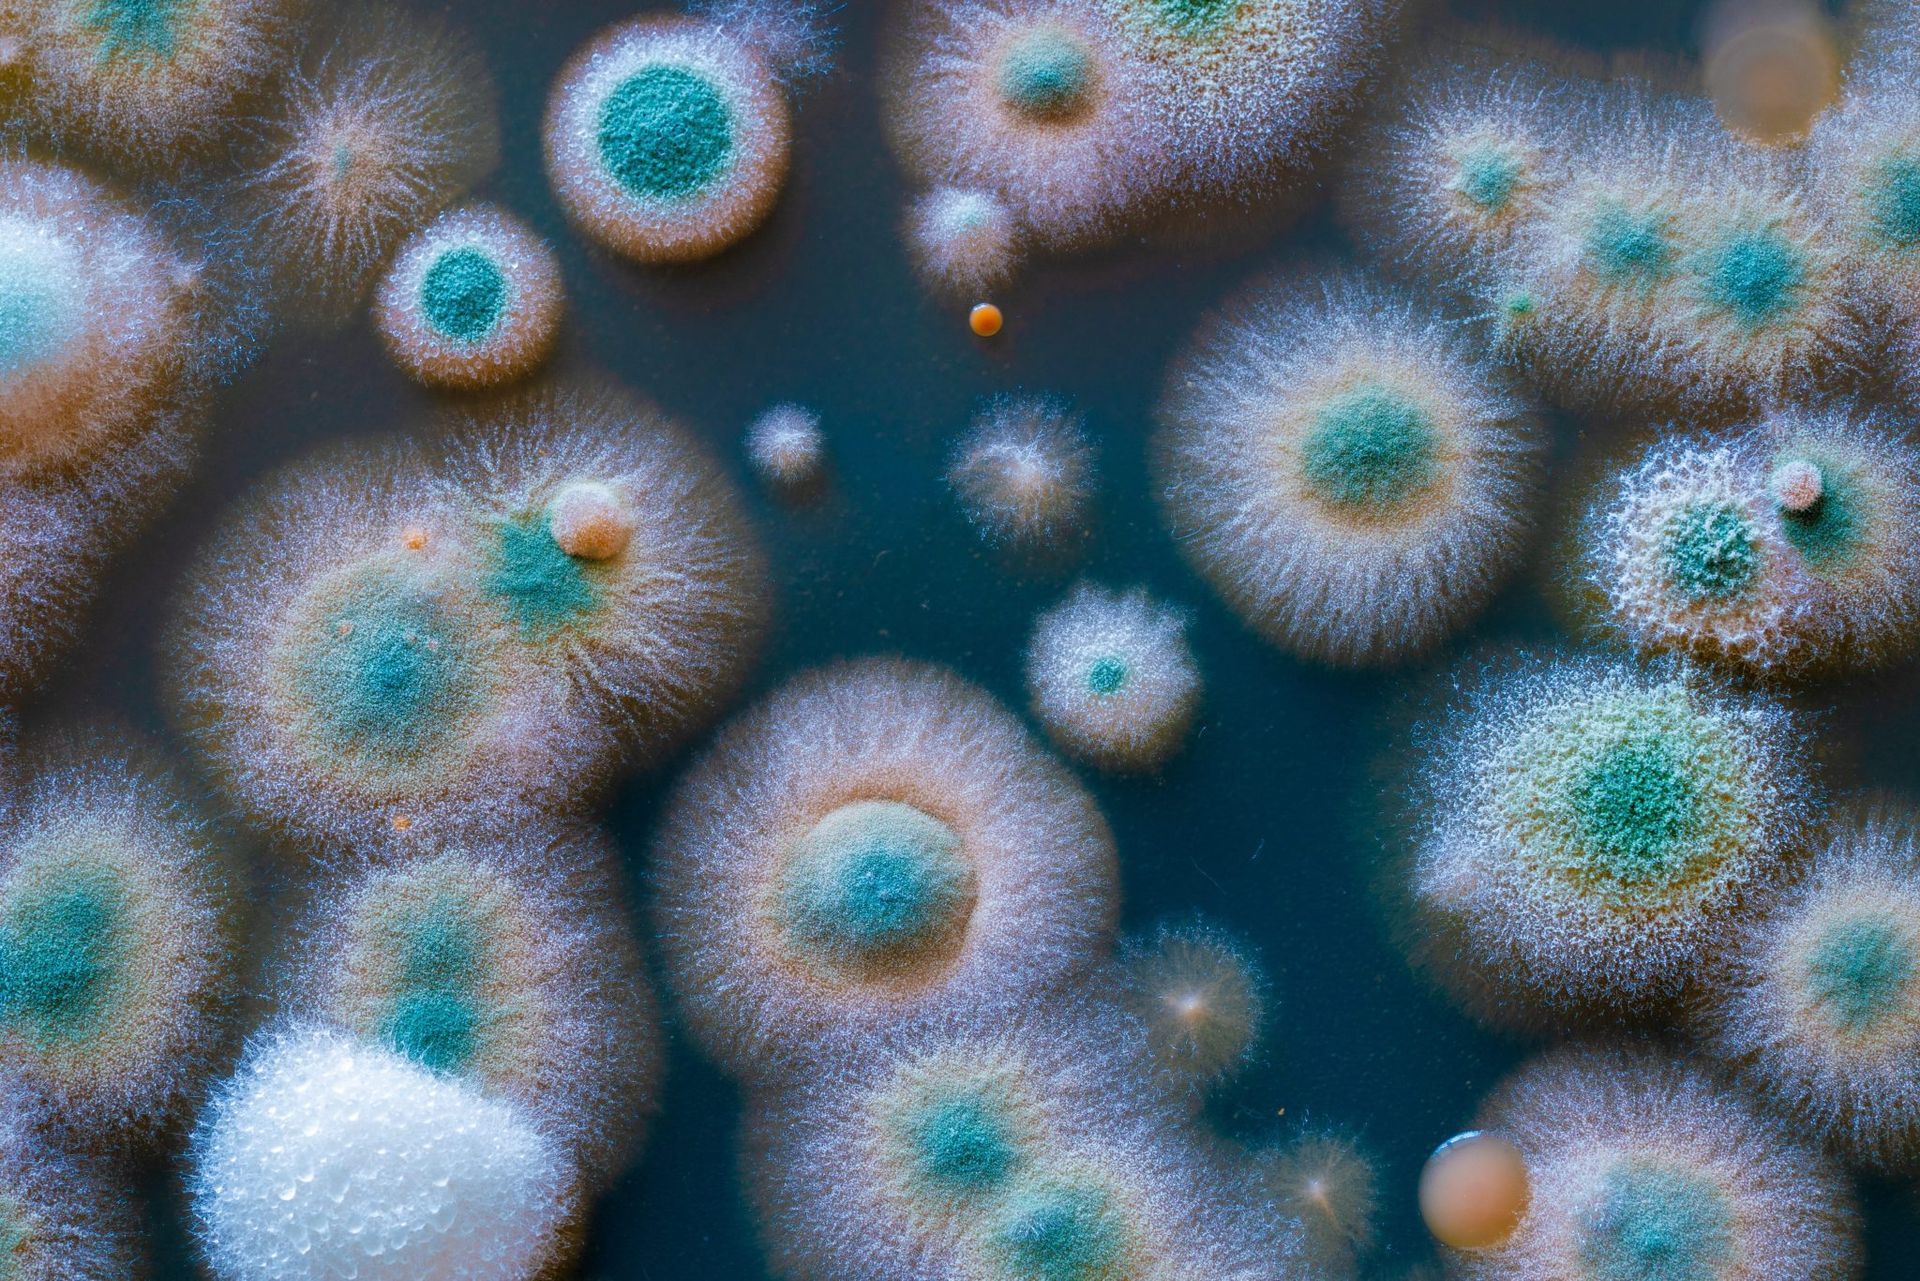 A close up of mold growing on a blue surface.